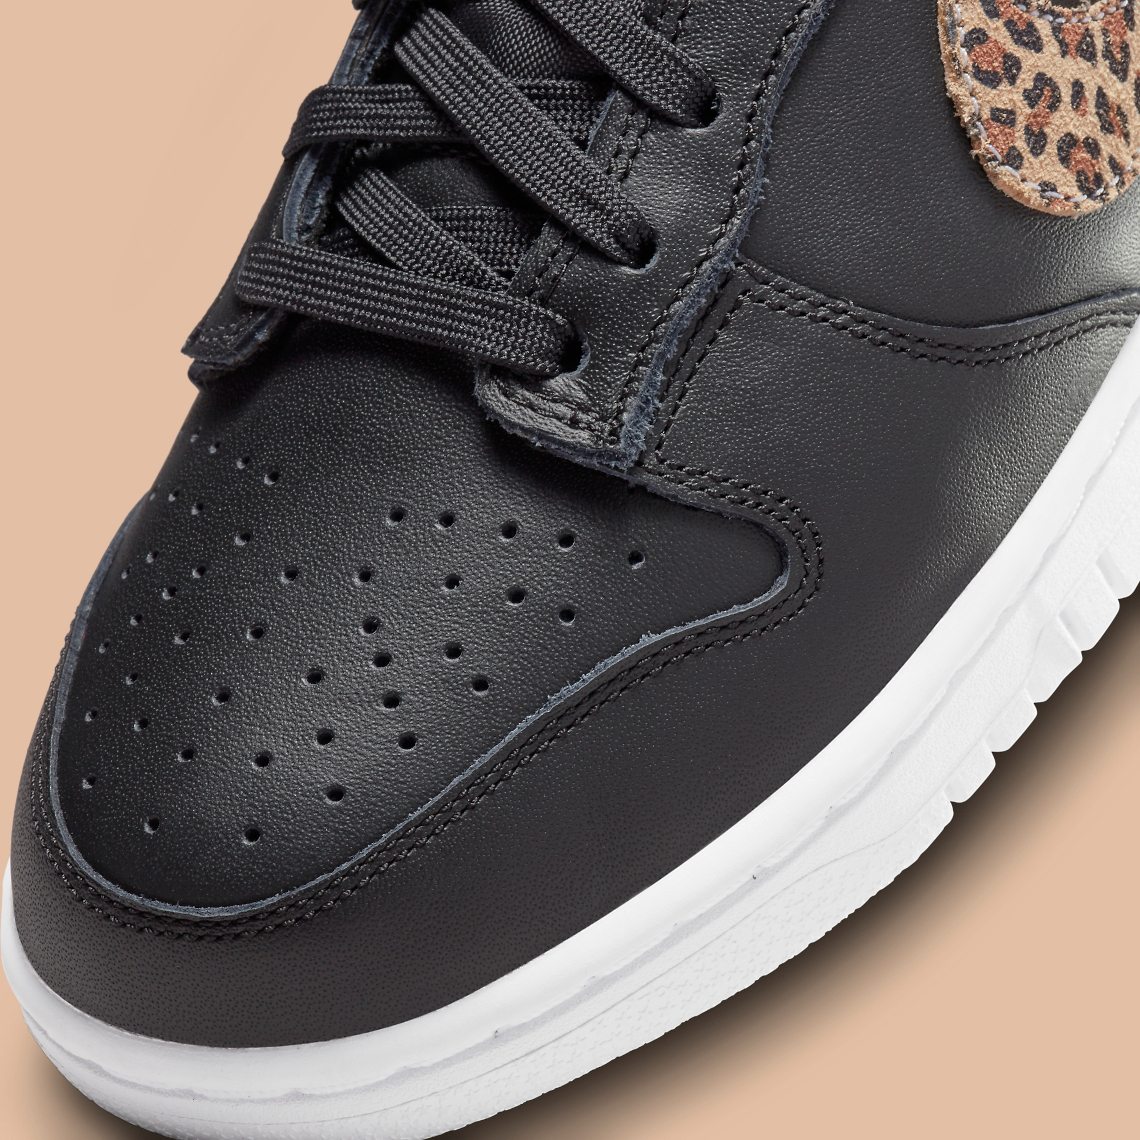 SB Dunk Low Fall Winter 2012 Collection Dd7099 001 5